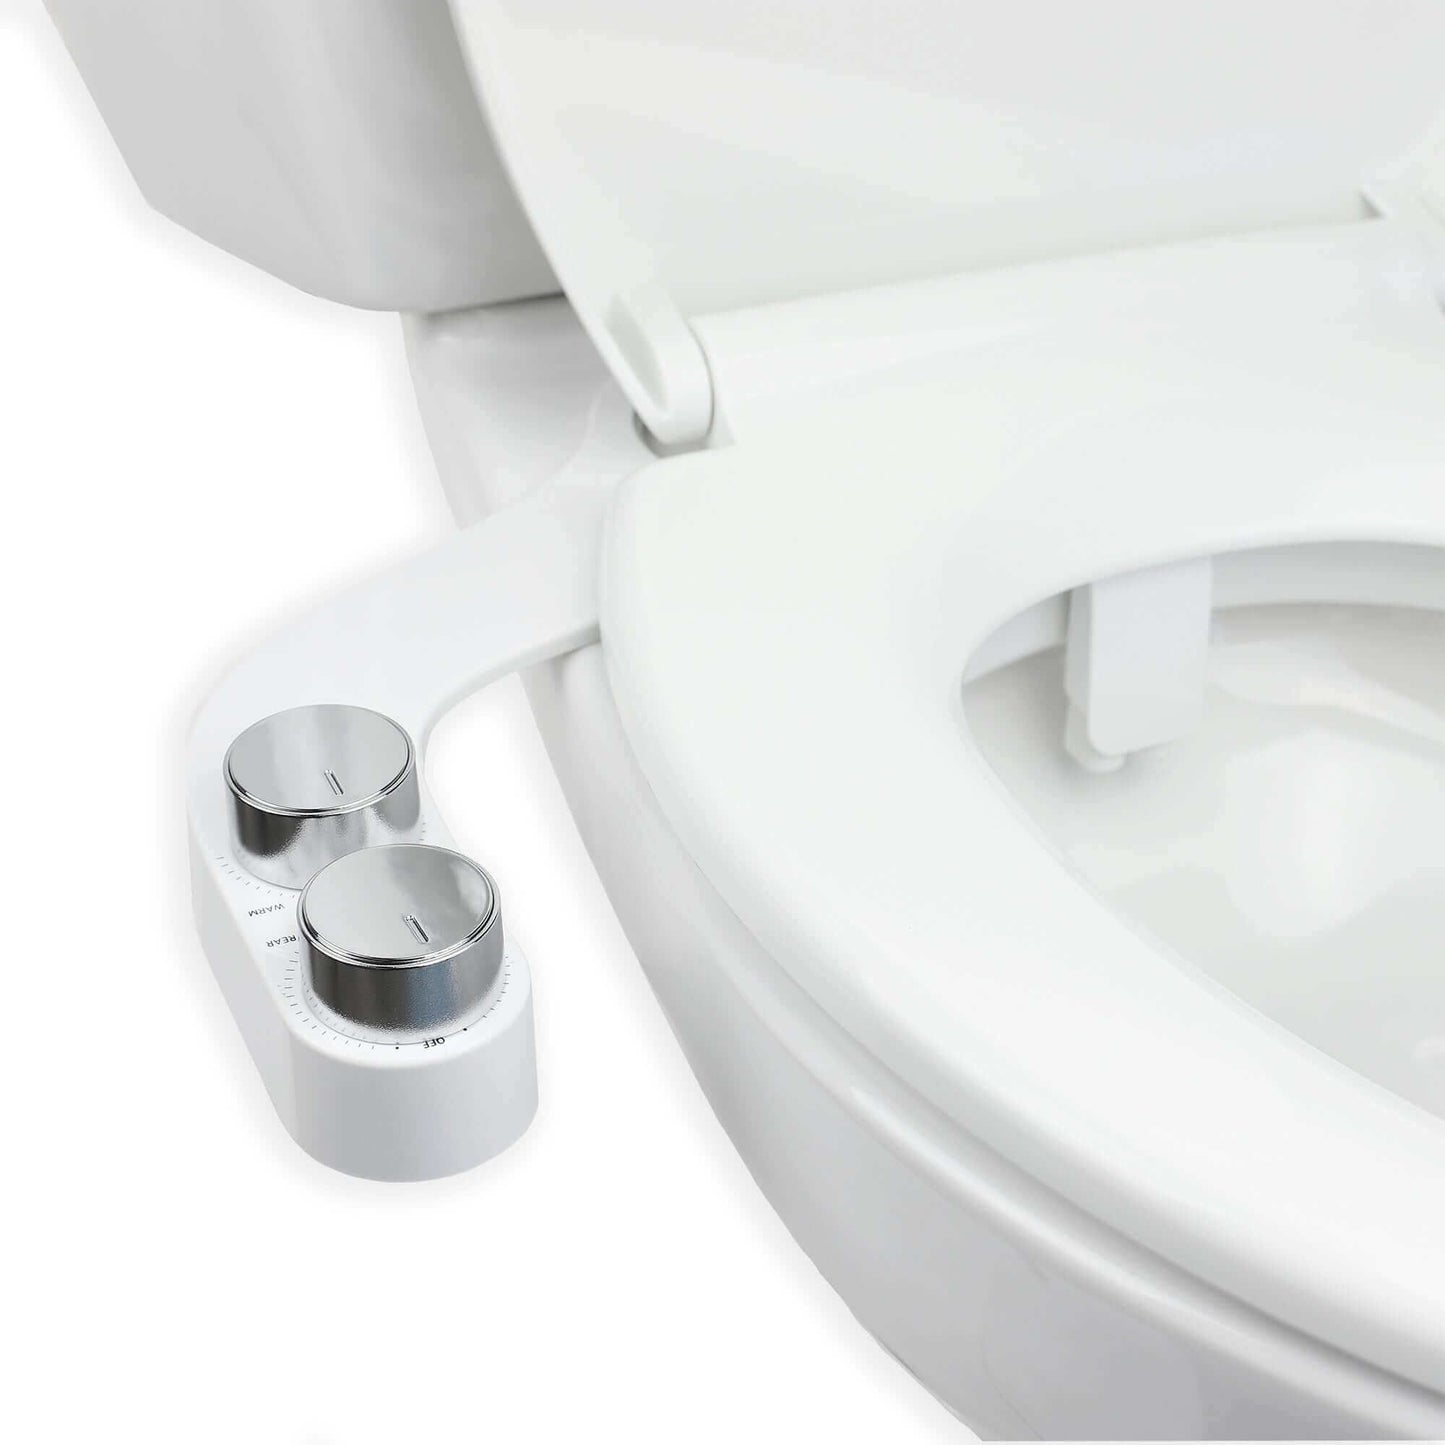 FreshSpa Comfort+ Bidet Attachment, Dual Temperature, Dual Nozzles - side angled view attached to toillet